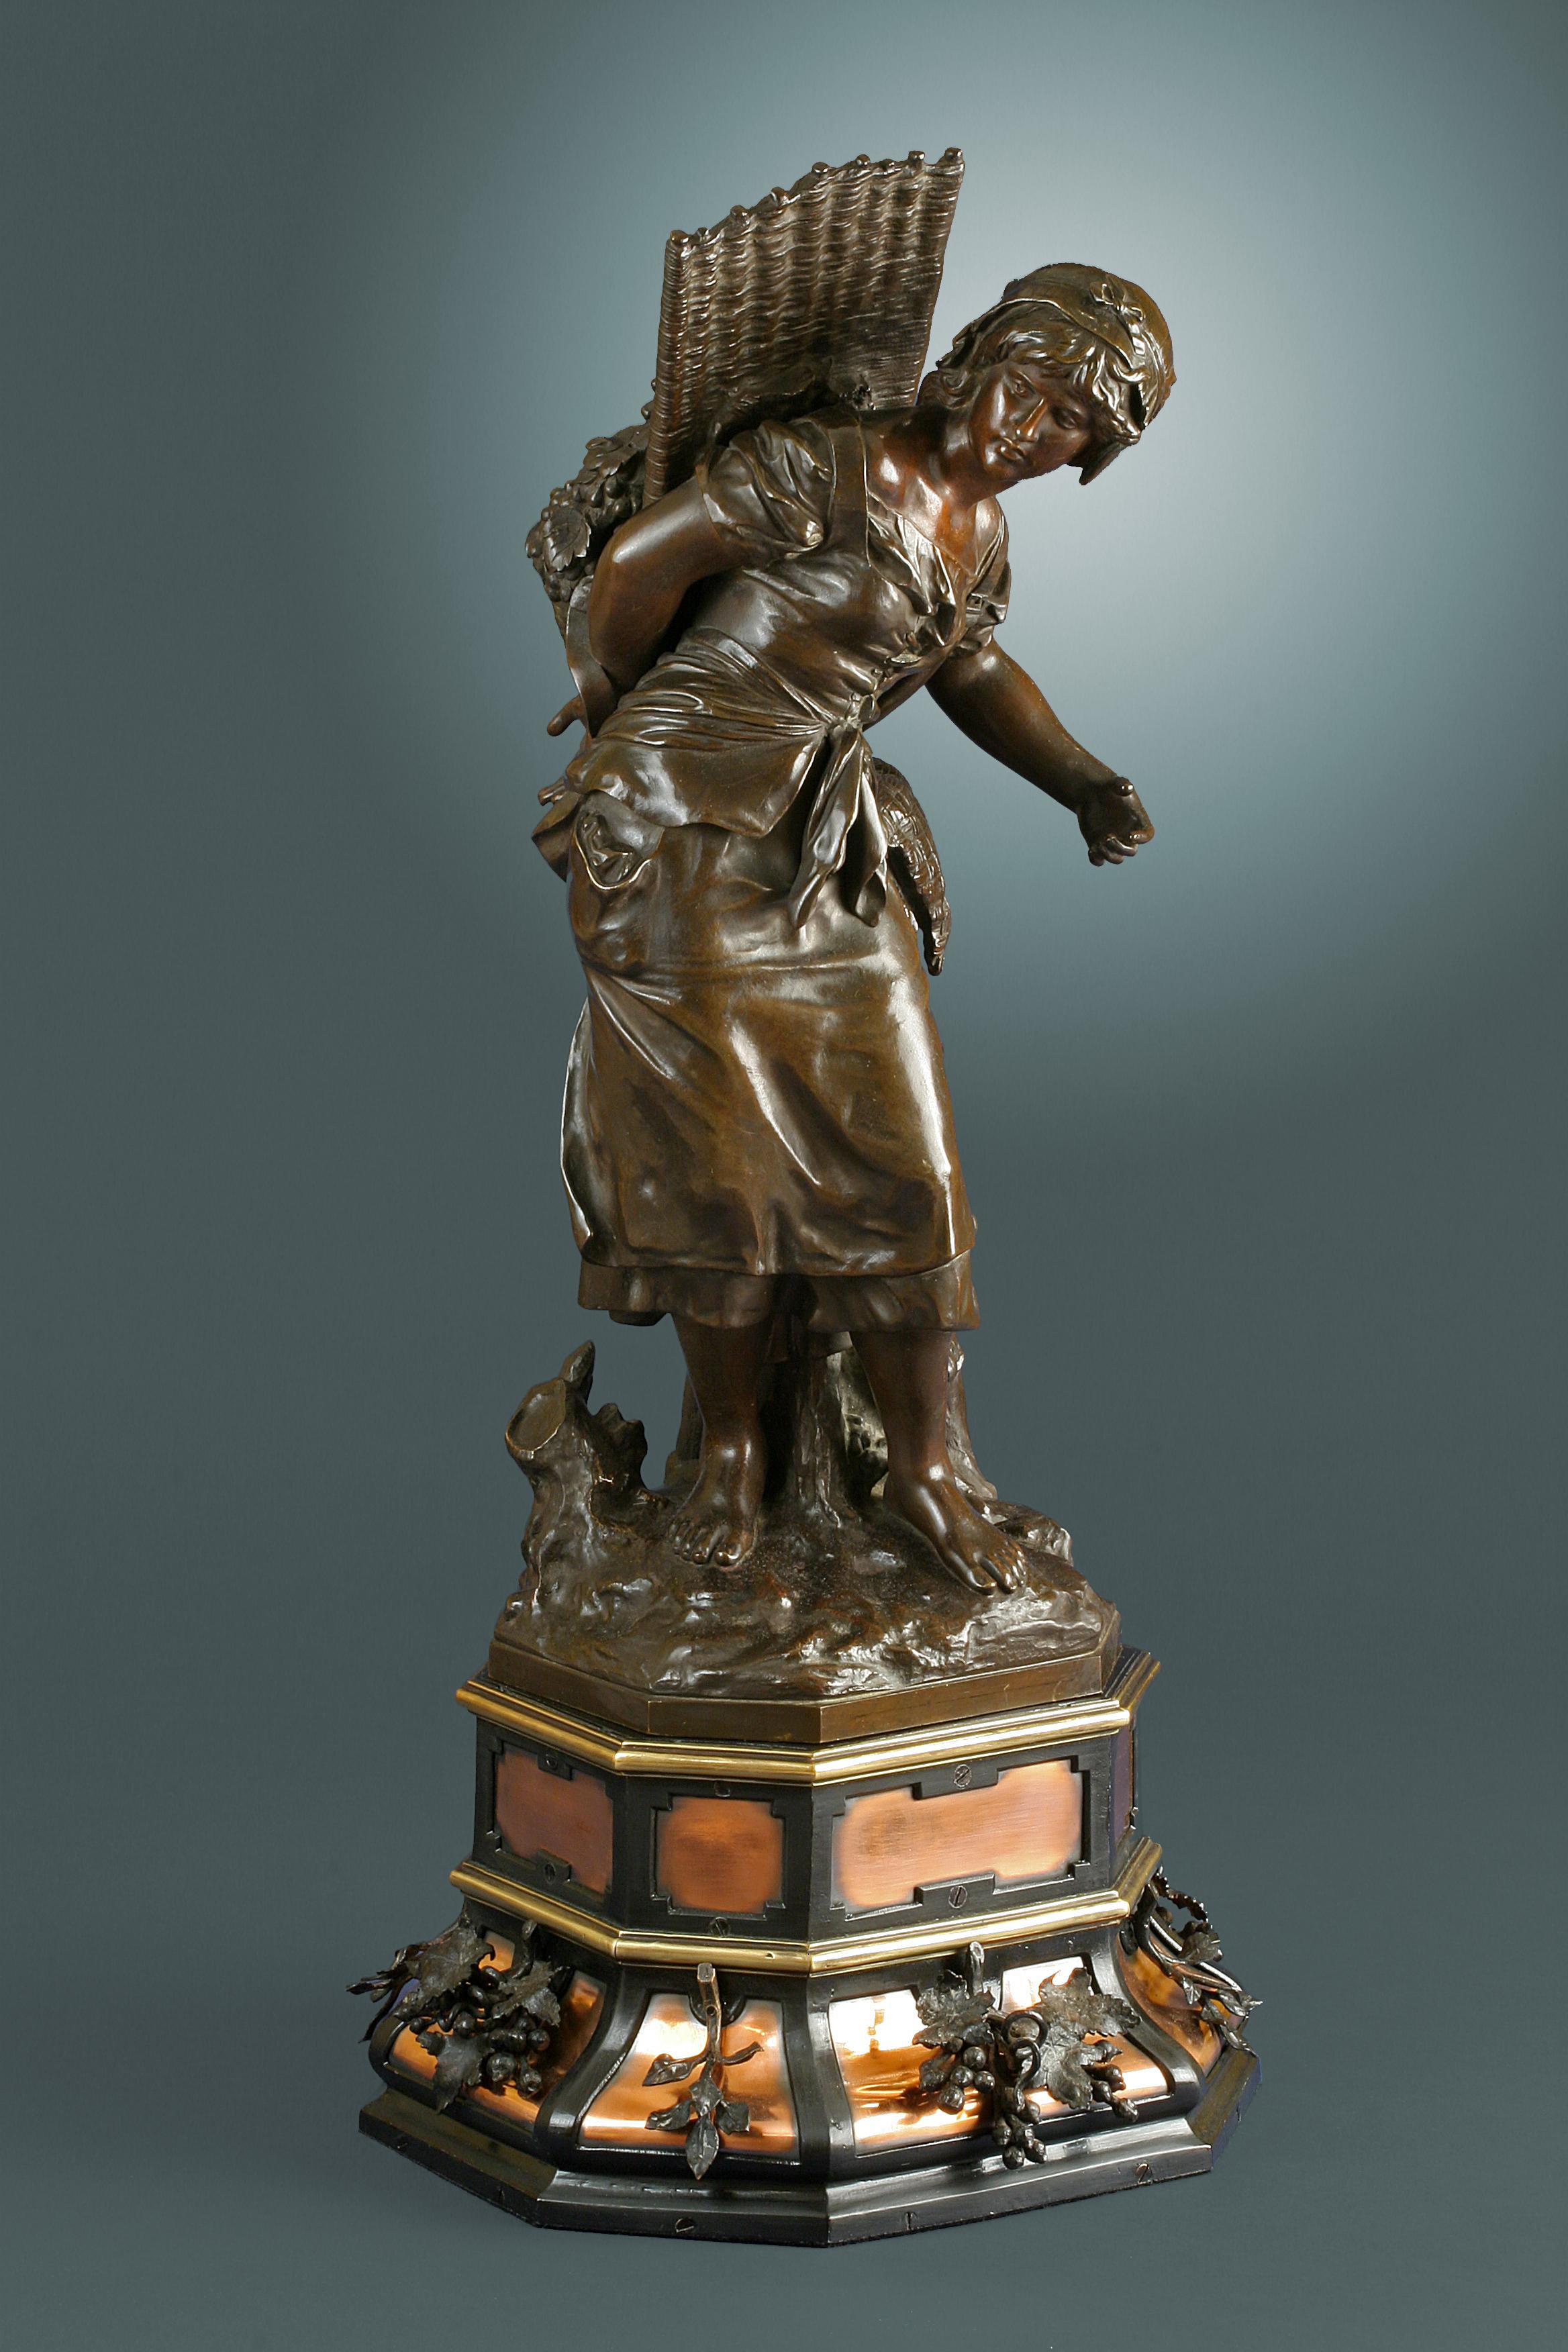 Mathurin Moreau Figurative Sculpture - 19th Century sculpture of Female in Bronze, titled "The Berry Gatherer"